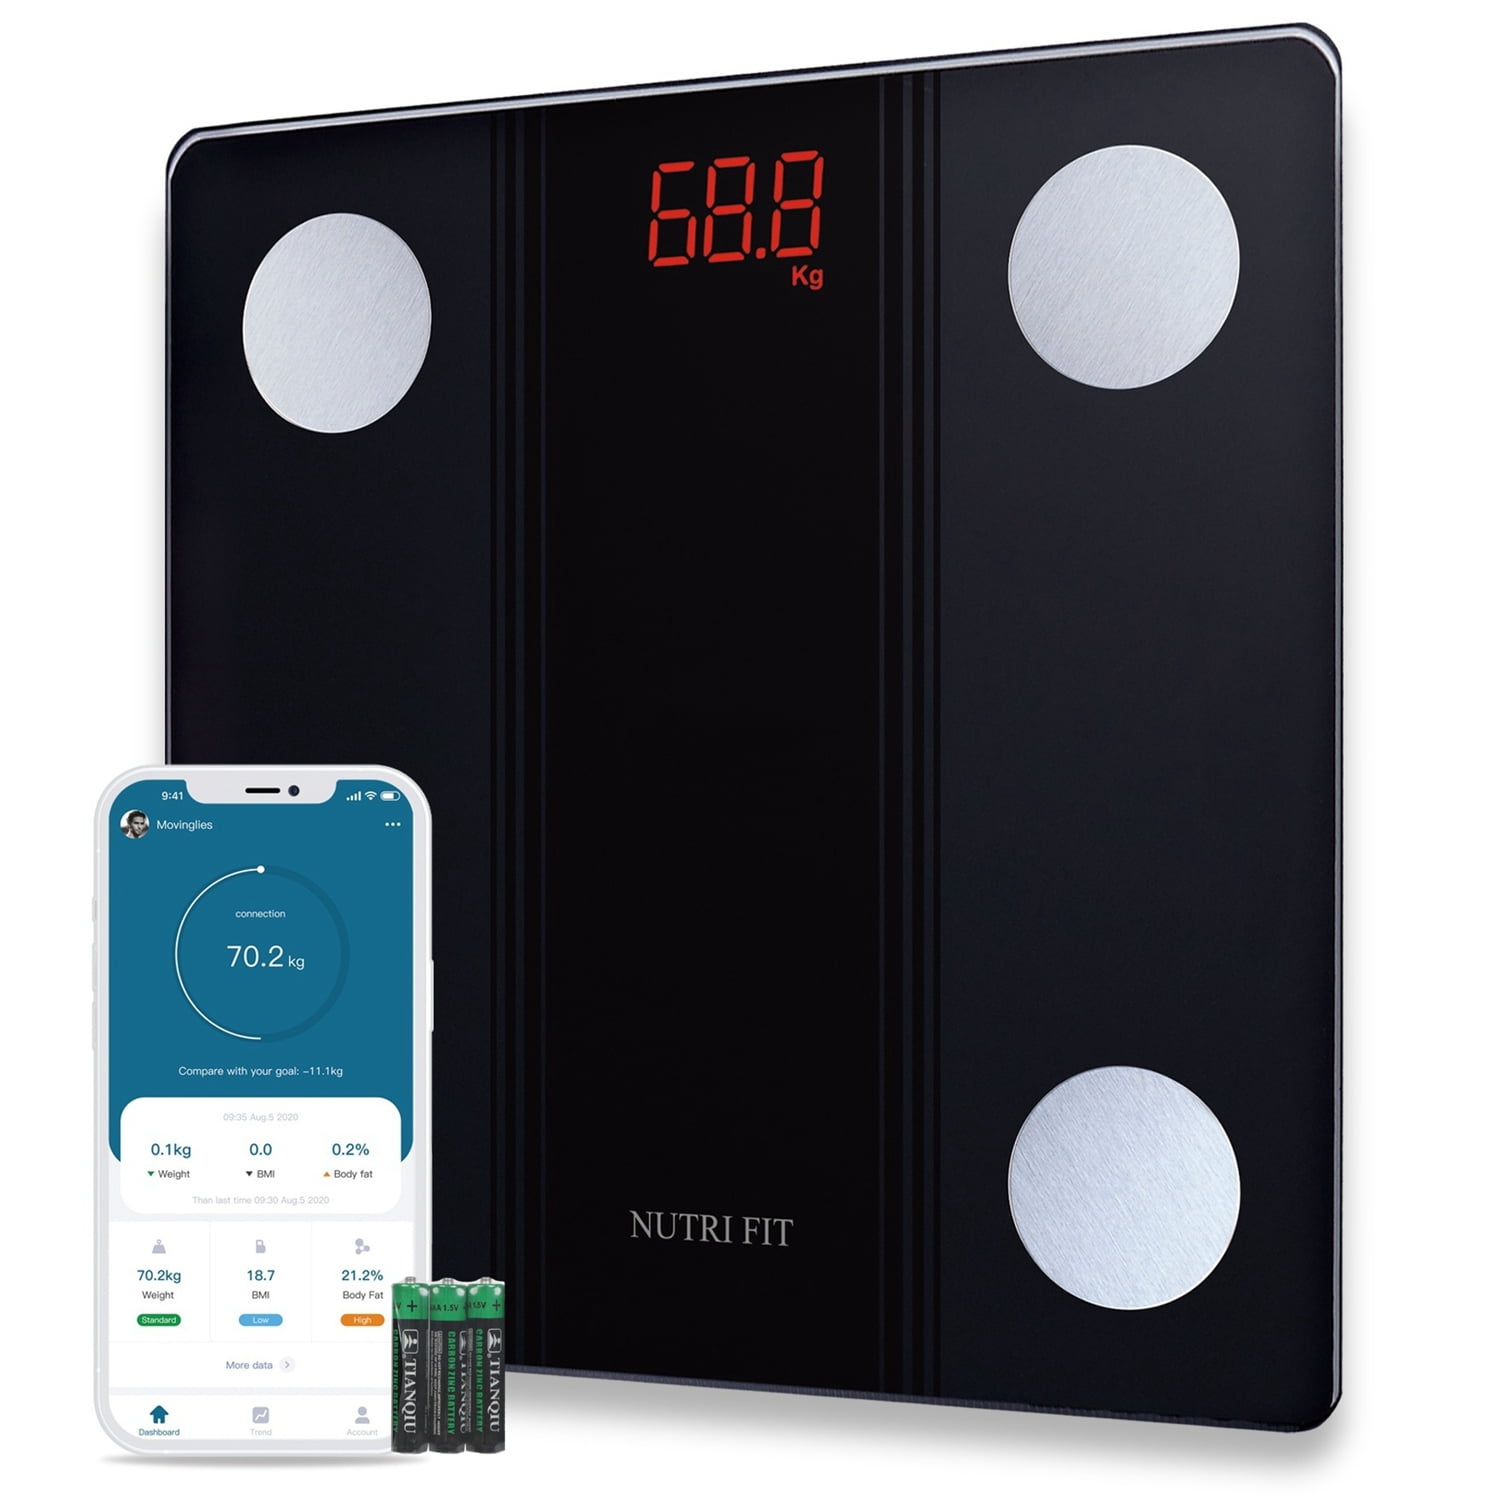 Vanity Planet Formfit+ and Bluetooth Digital Body Analyzer - Smart Scale Tracks 13 Fitness Metrics Including Fat, Weight, Muscle/Bone Mass, Water